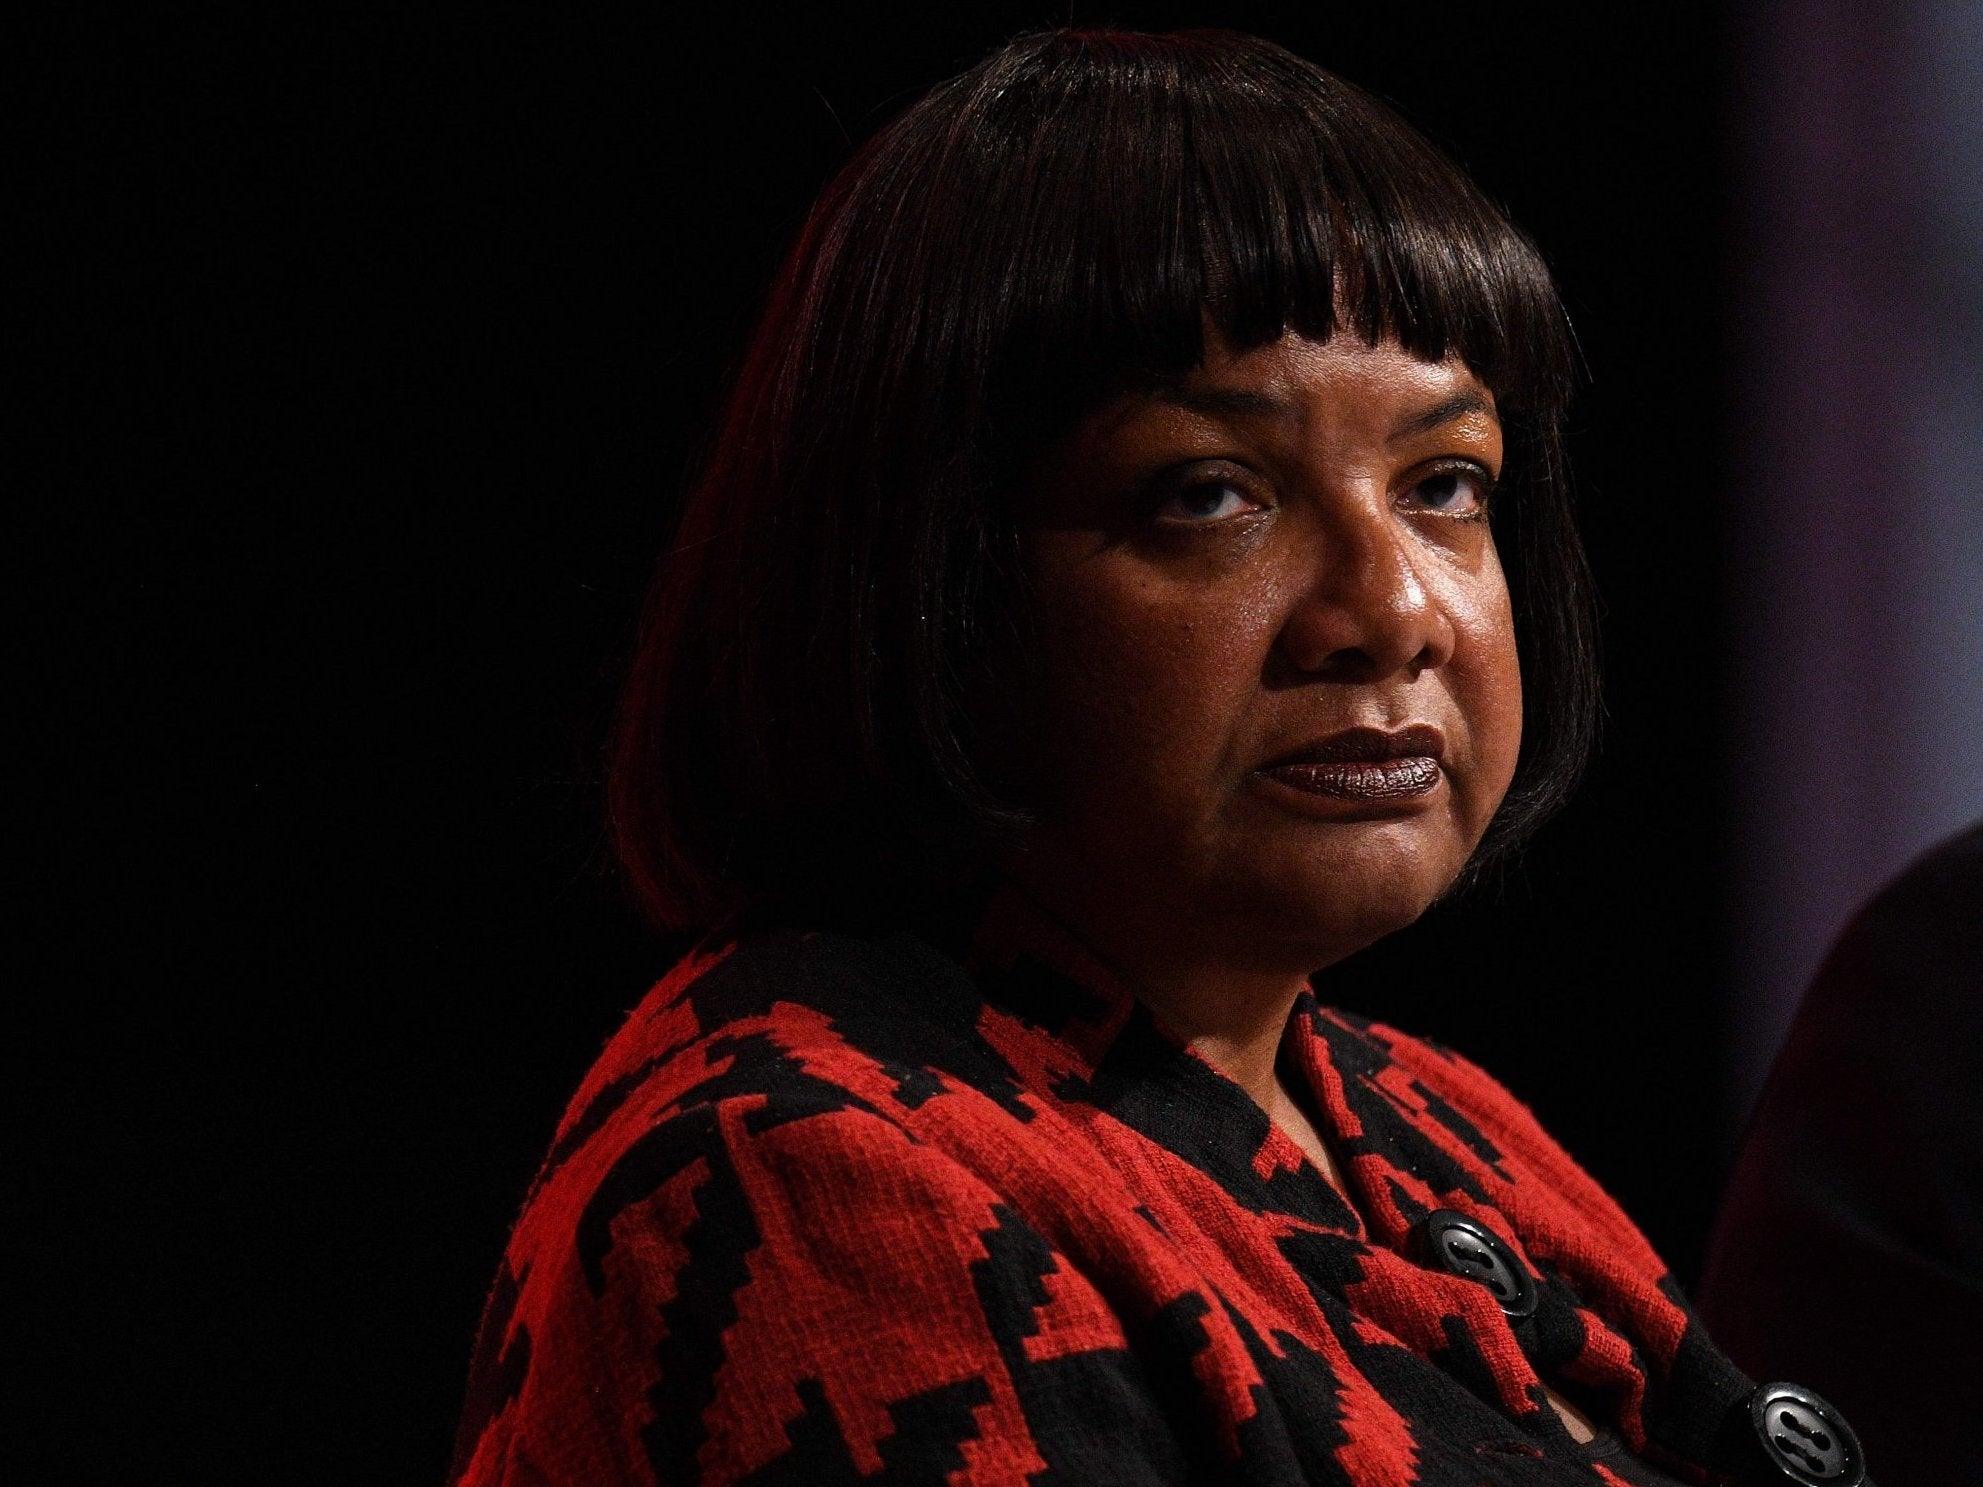 Shadow home secretary Diane Abbott received half of all abusive tweets sent to female MPs during the run-up to the 2017 election